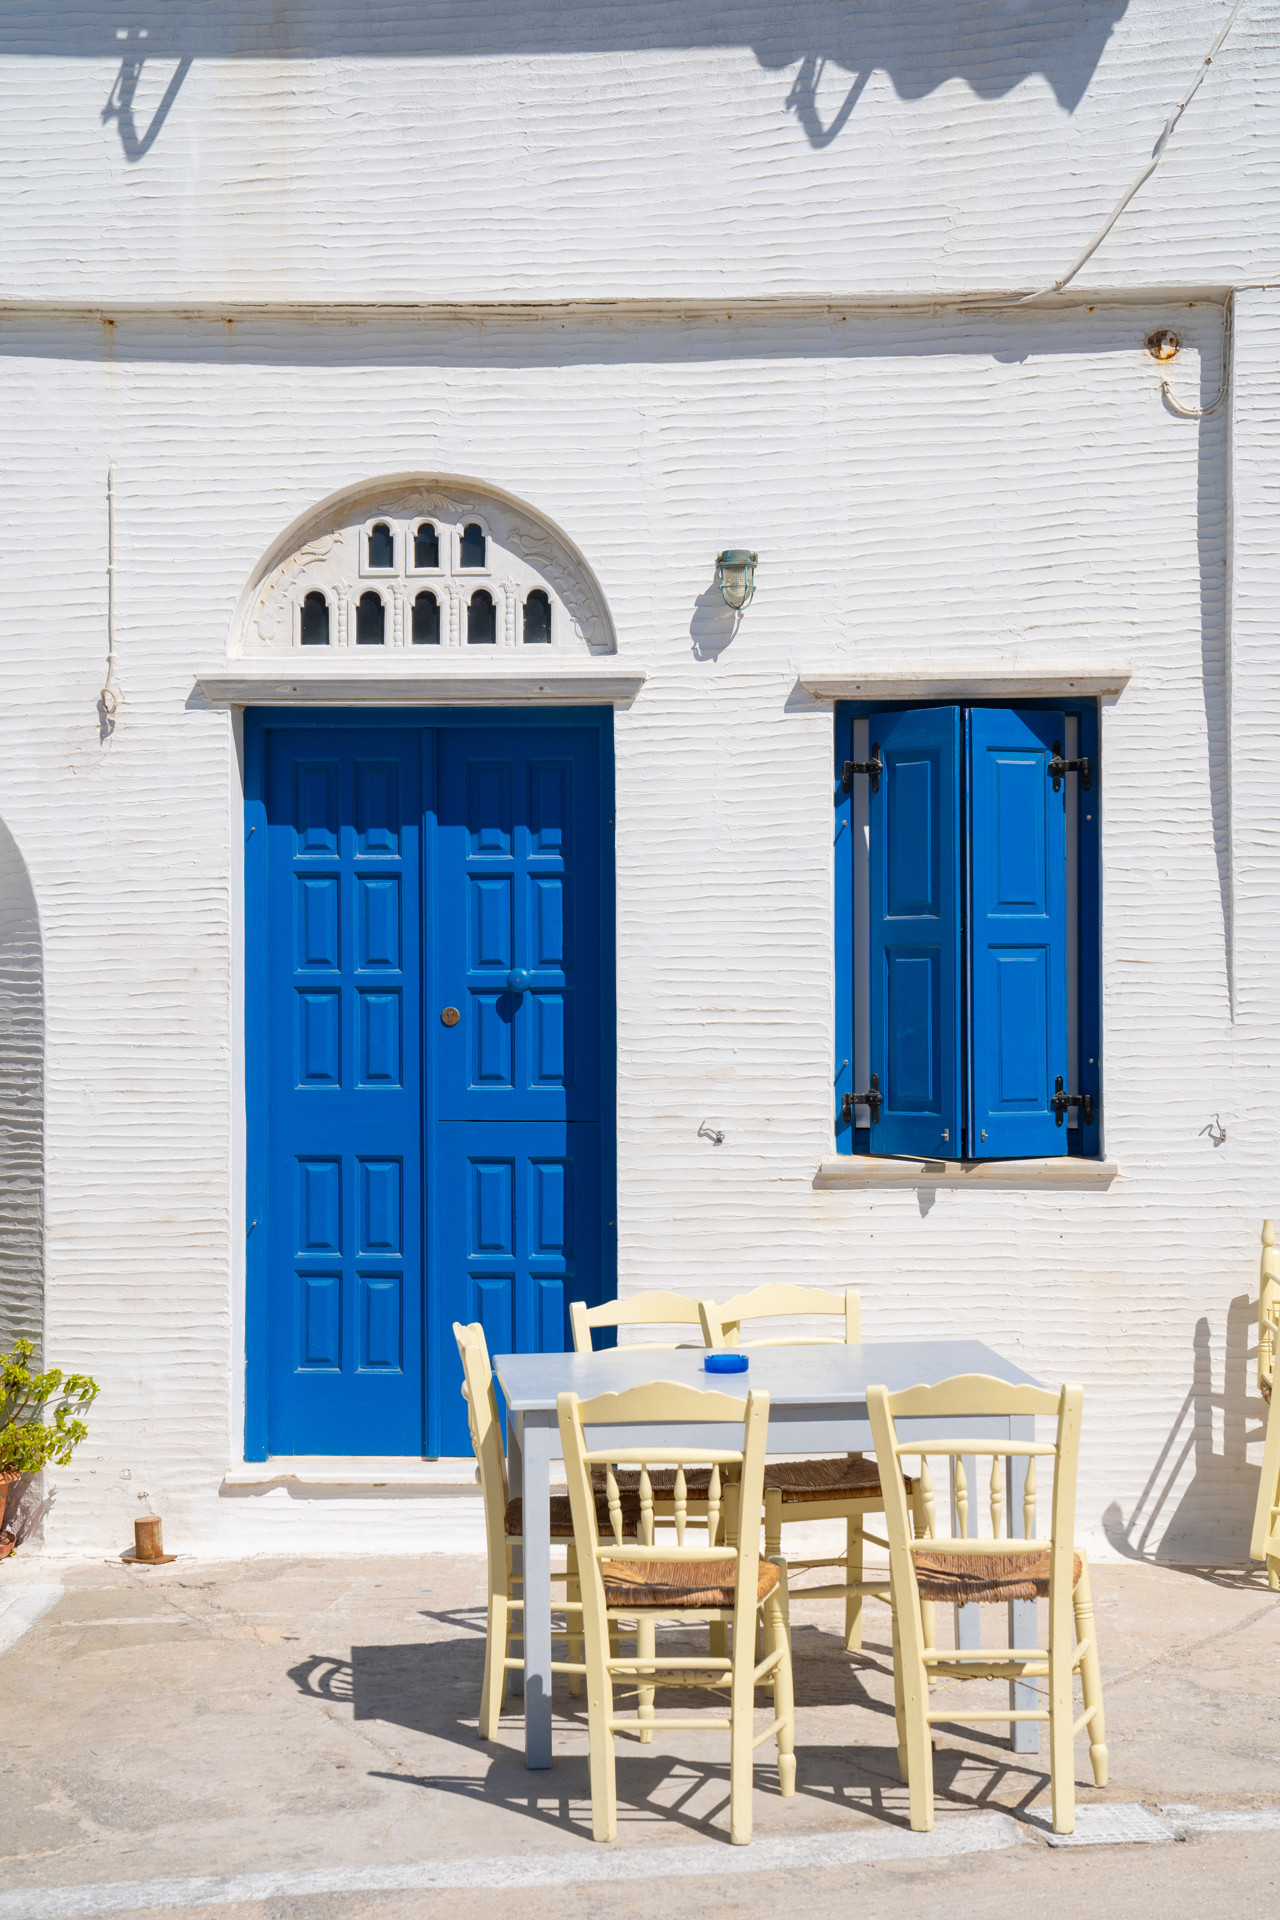 A beautiful Cycladic doorway in the village of Panormos in Tinos